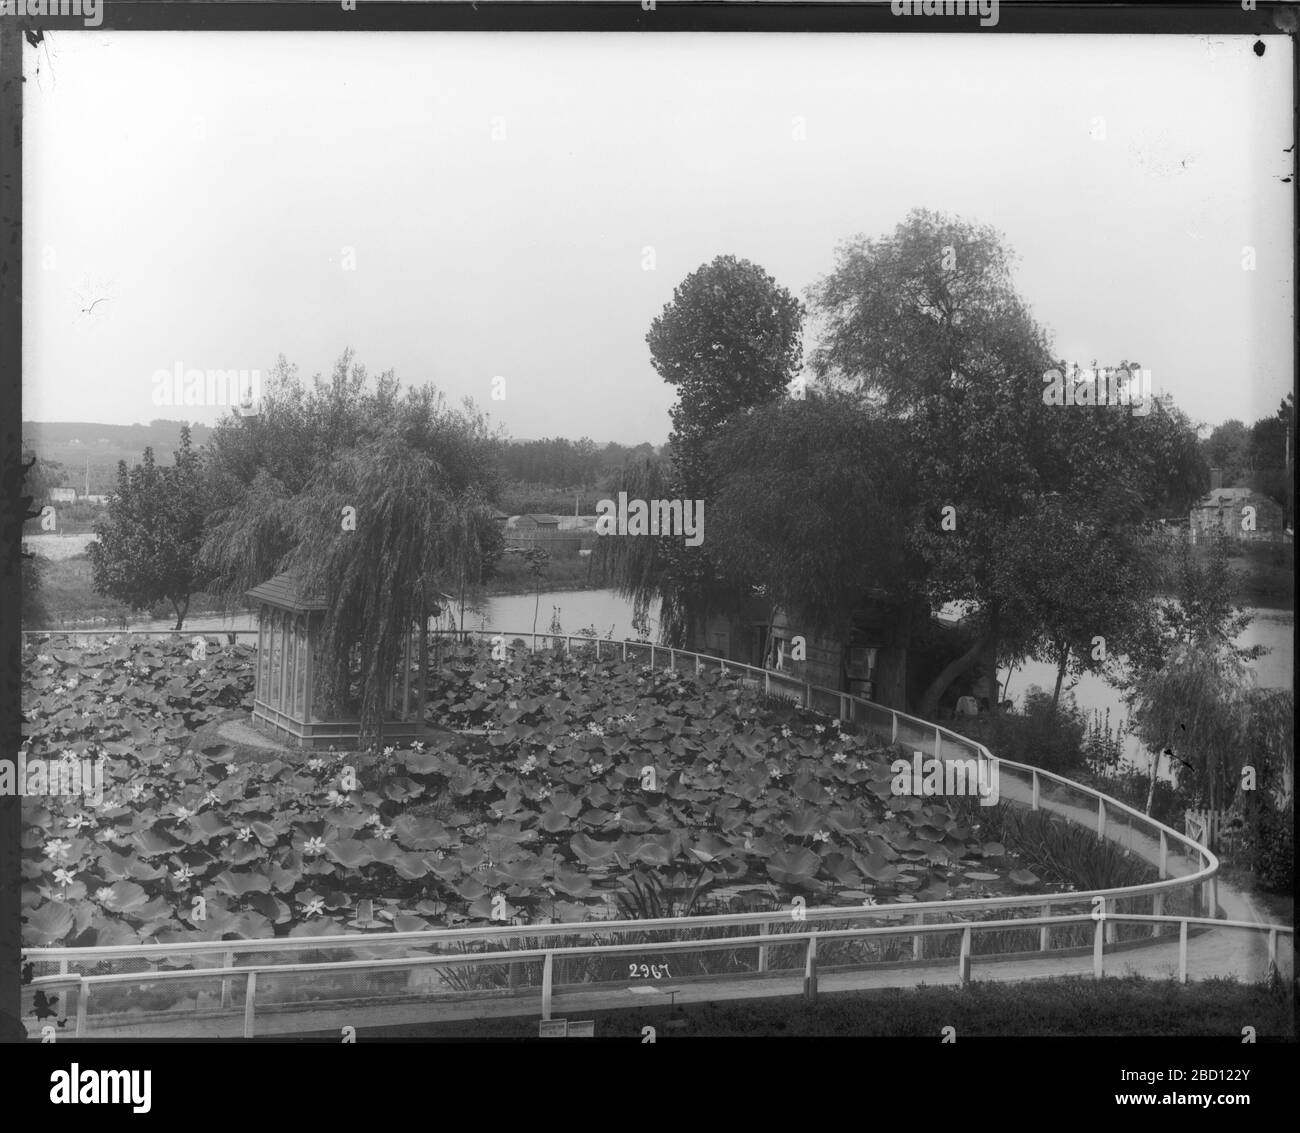 United States Fish Commission Hatchery Ponds. U.S. Fish Commission fish hatchery ponds for the production of carp, golden ide, and tench, located near the grounds of the Washington Monument.Smithsonian Institution Archives, Acc. 11-006, Box 006, Image No. MAH-2967 Stock Photo